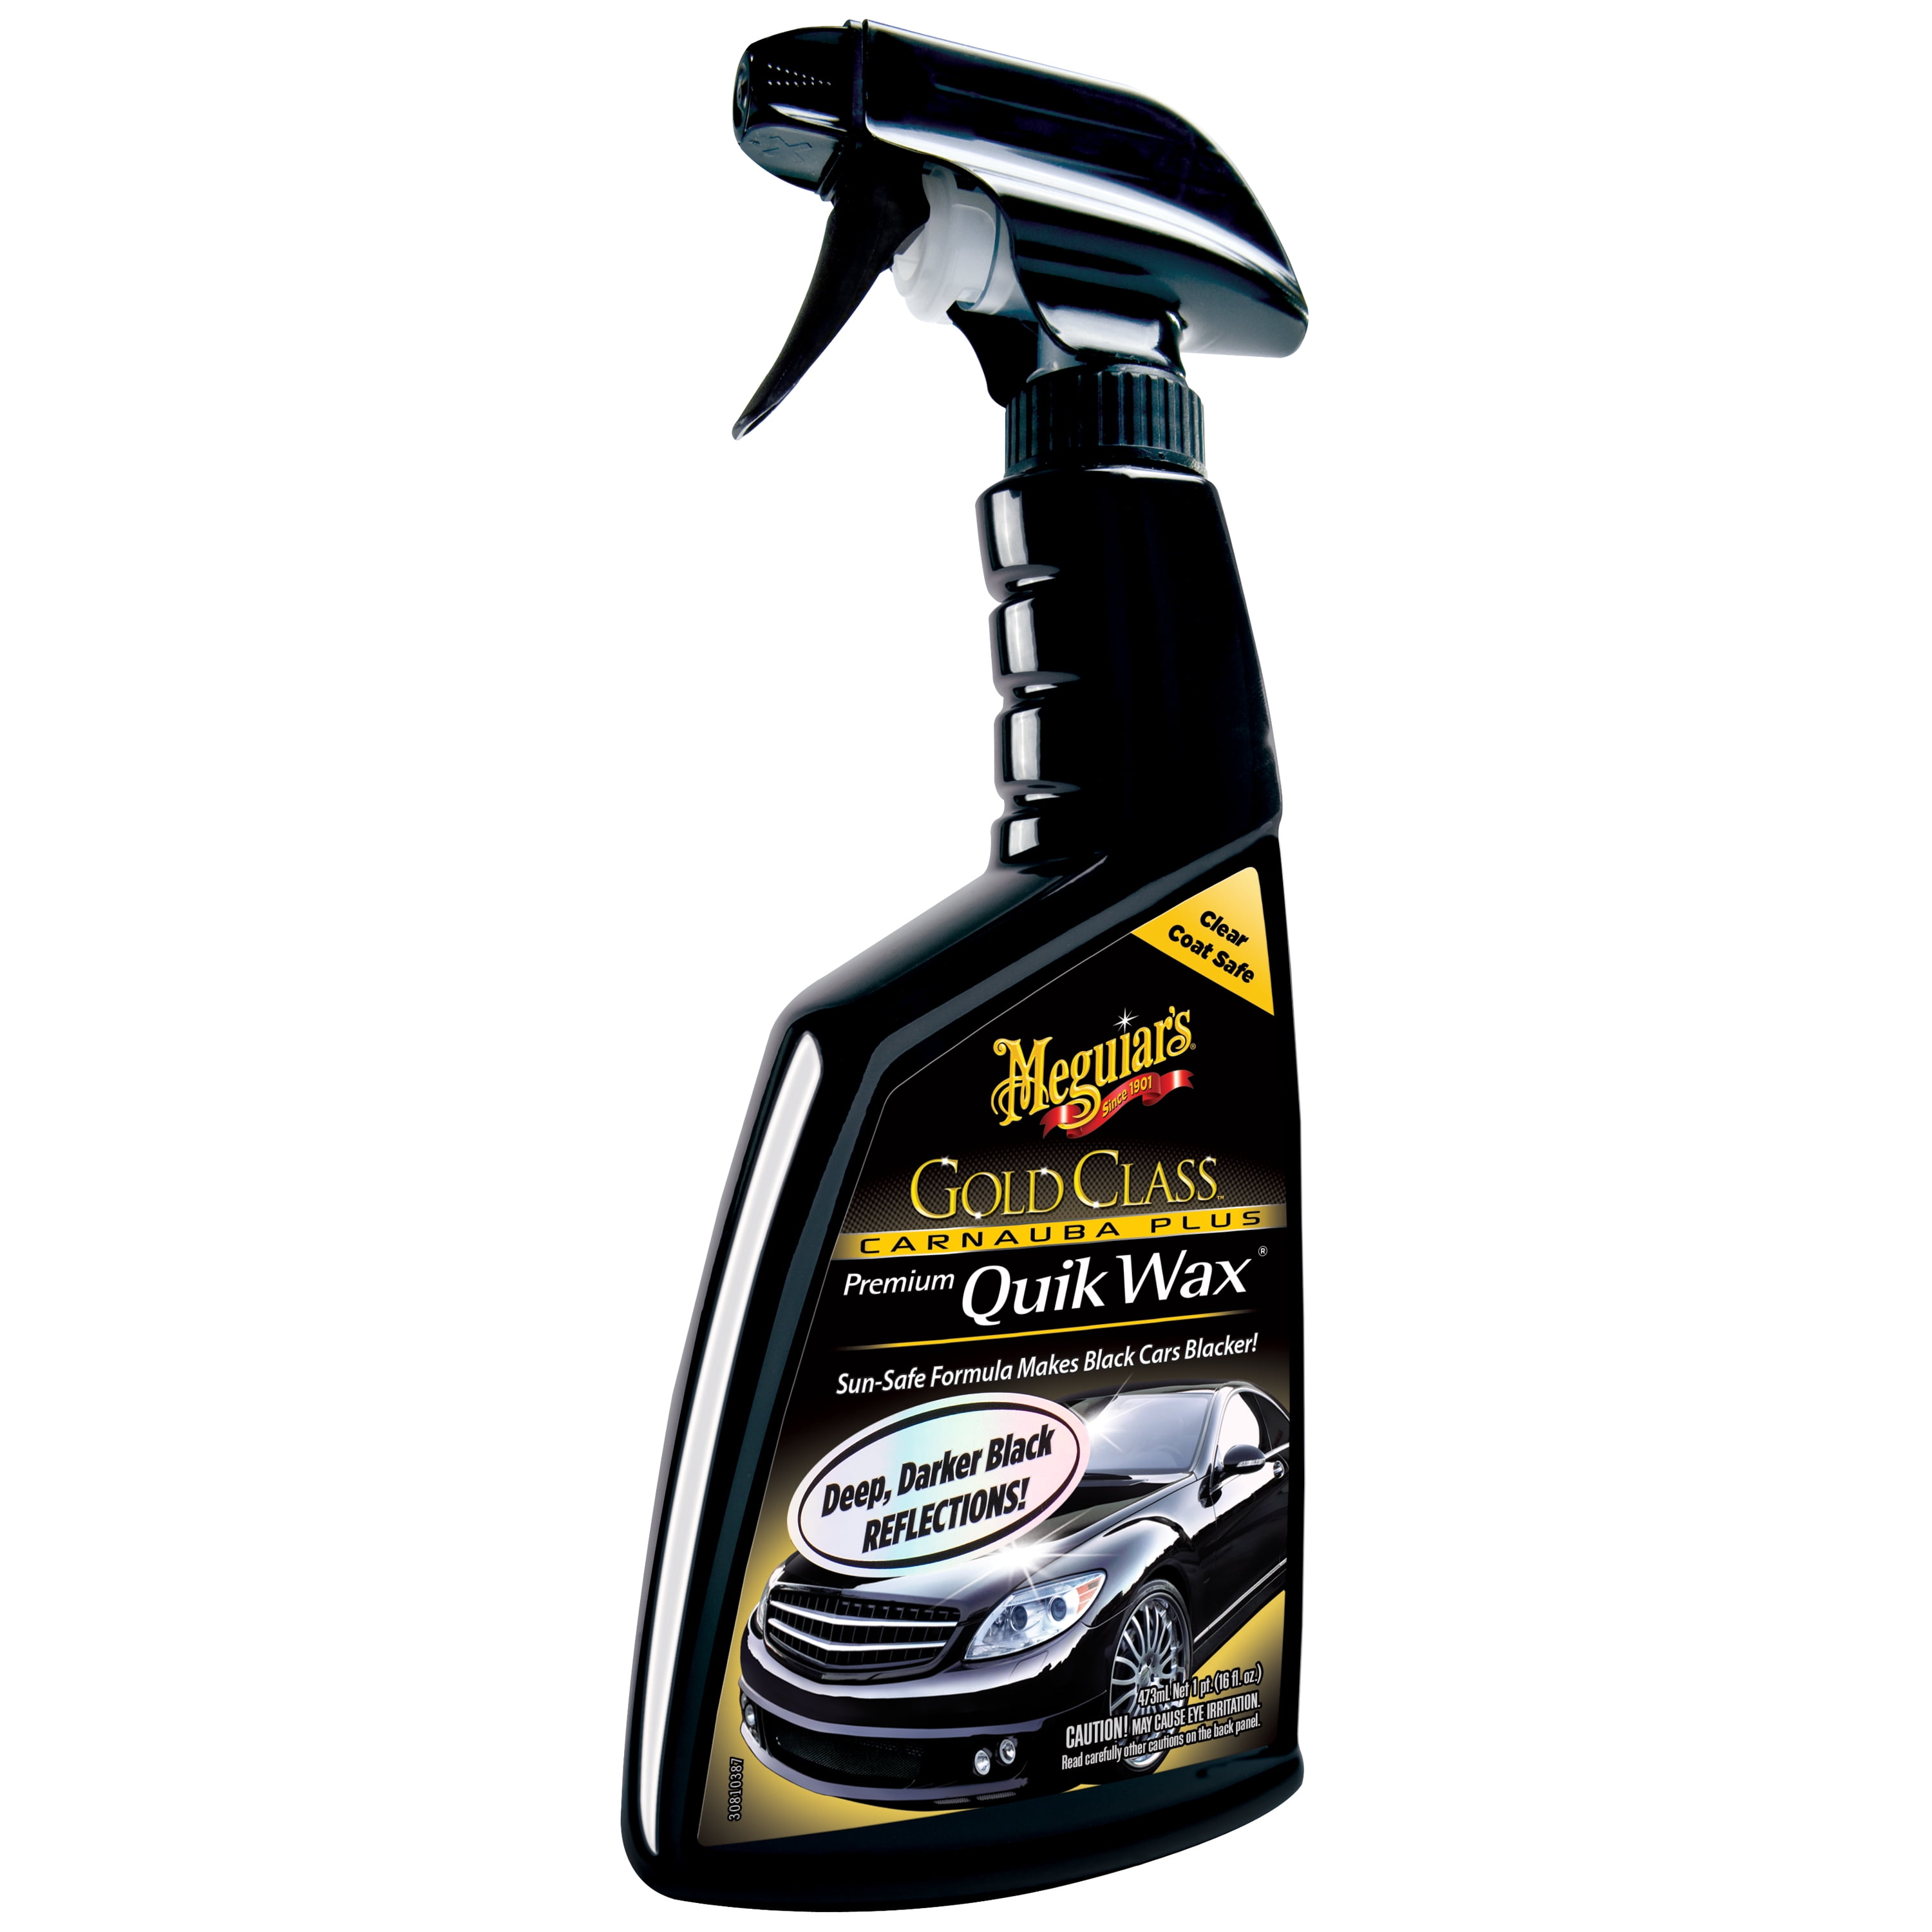  Meguiar's Gold Class Carnauba Plus Premium Liquid Wax -  Long-lasting Protection, Deep Shine, Easy Application - The Perfect Car Wax  for All Vehicles with Glossy Paint - 16 Oz : Everything Else